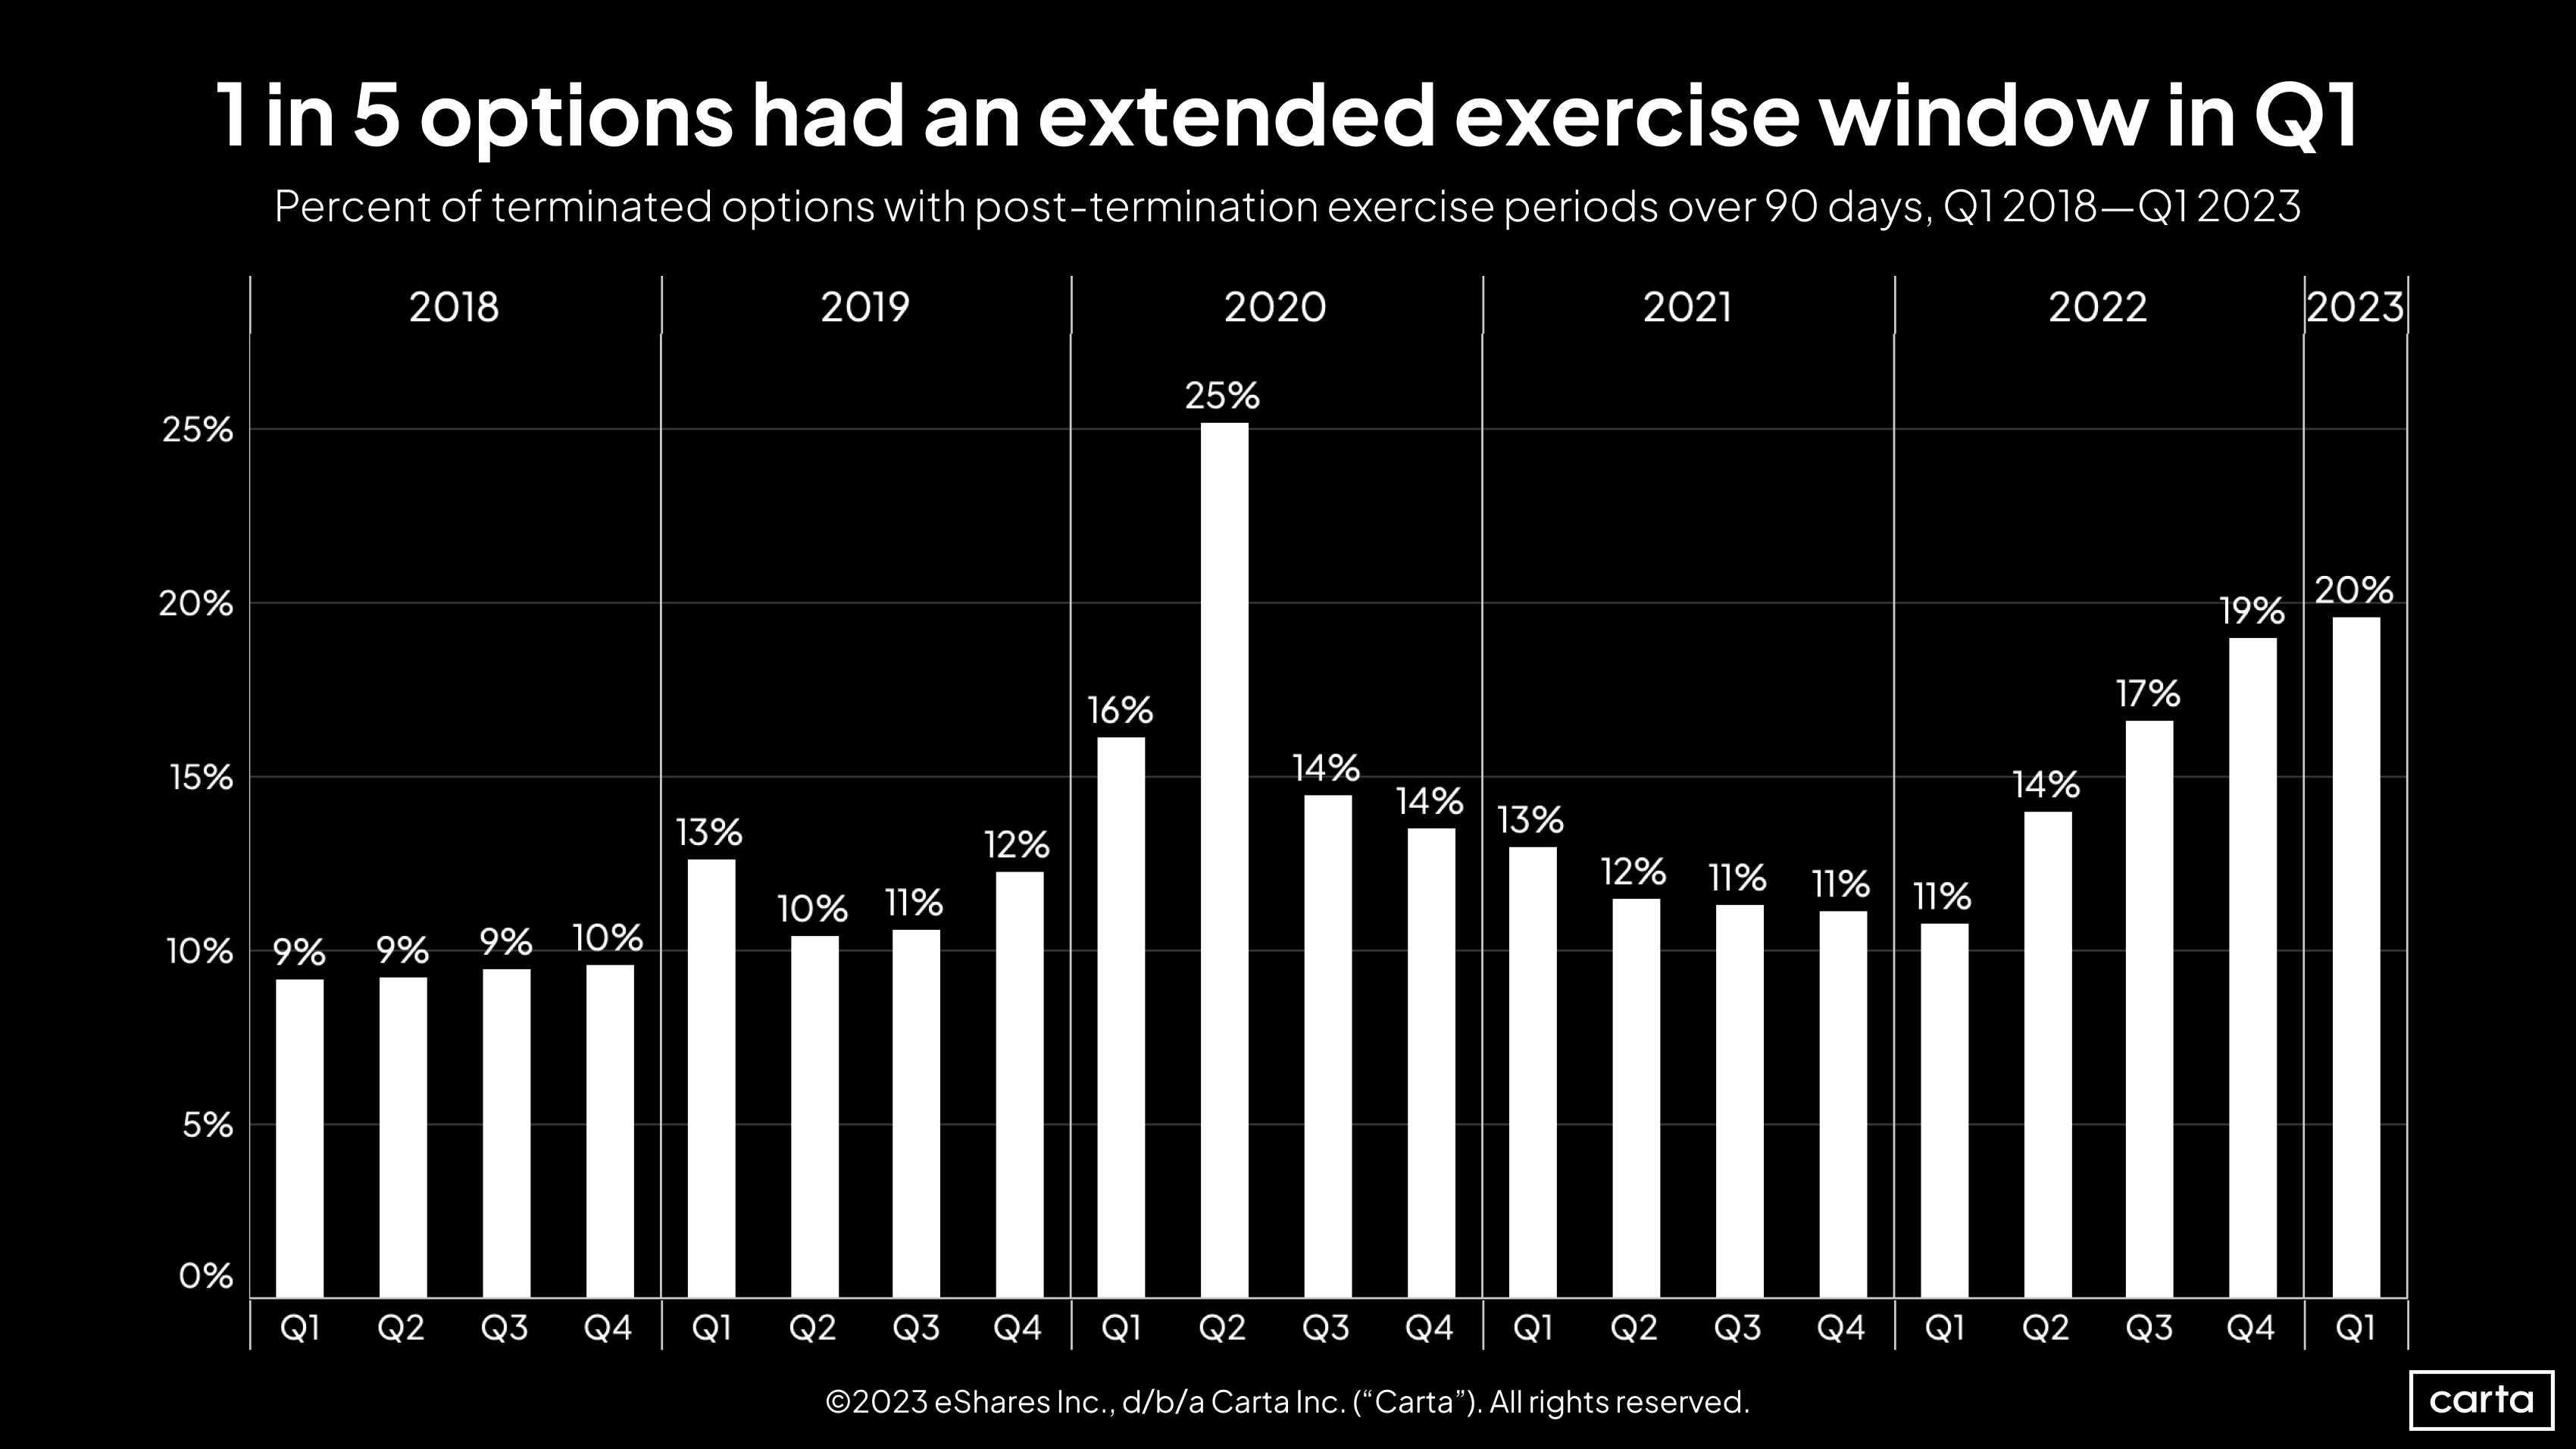 Percent of terminated options with post-termination exercise periods over 90 days, Q1 2018-Q1 2023